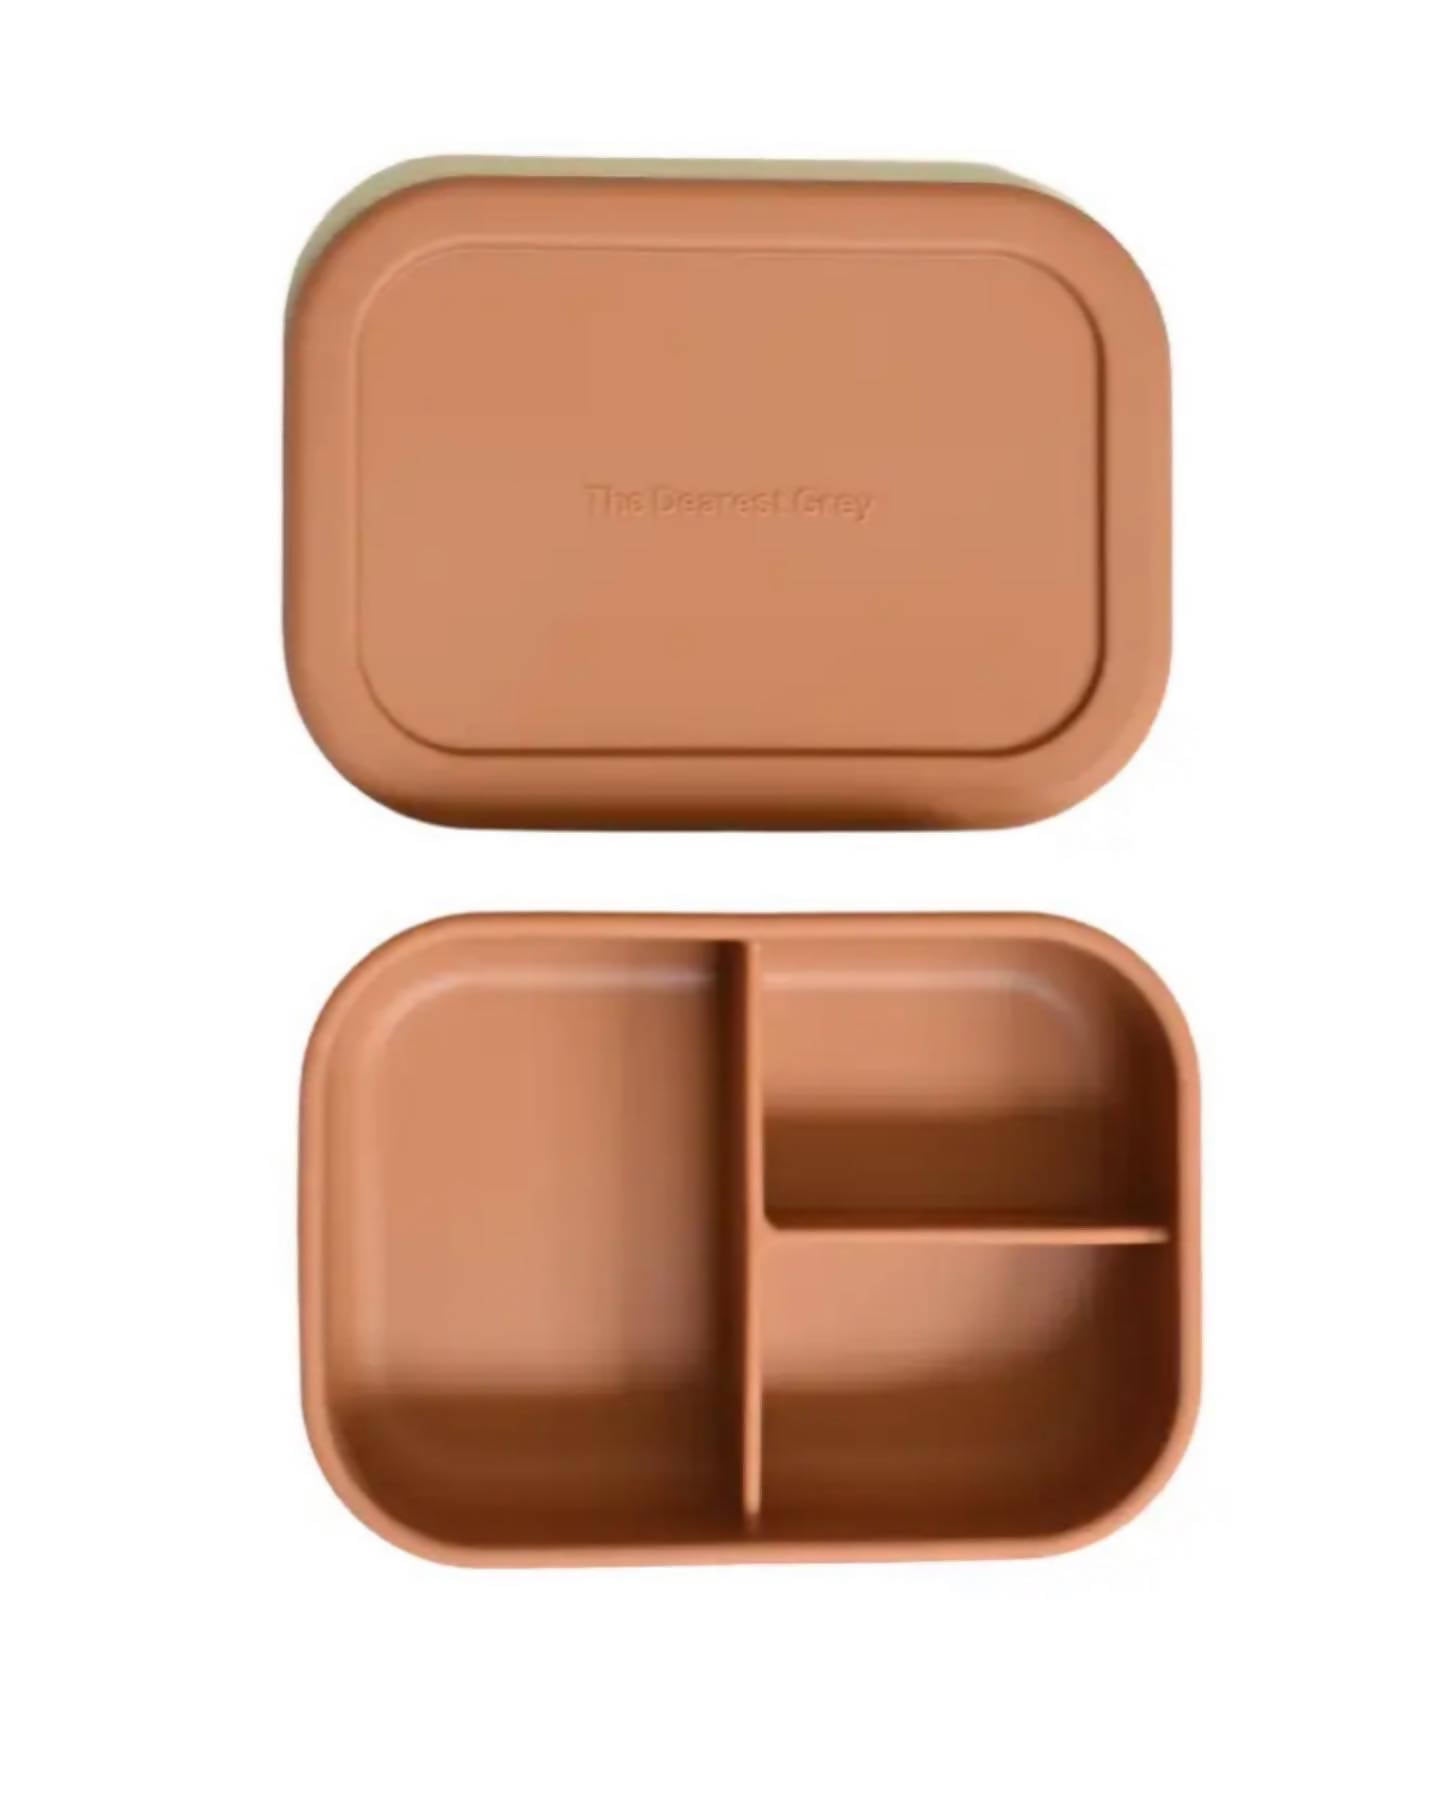 Silicone Bento Box by The Dearest Grey